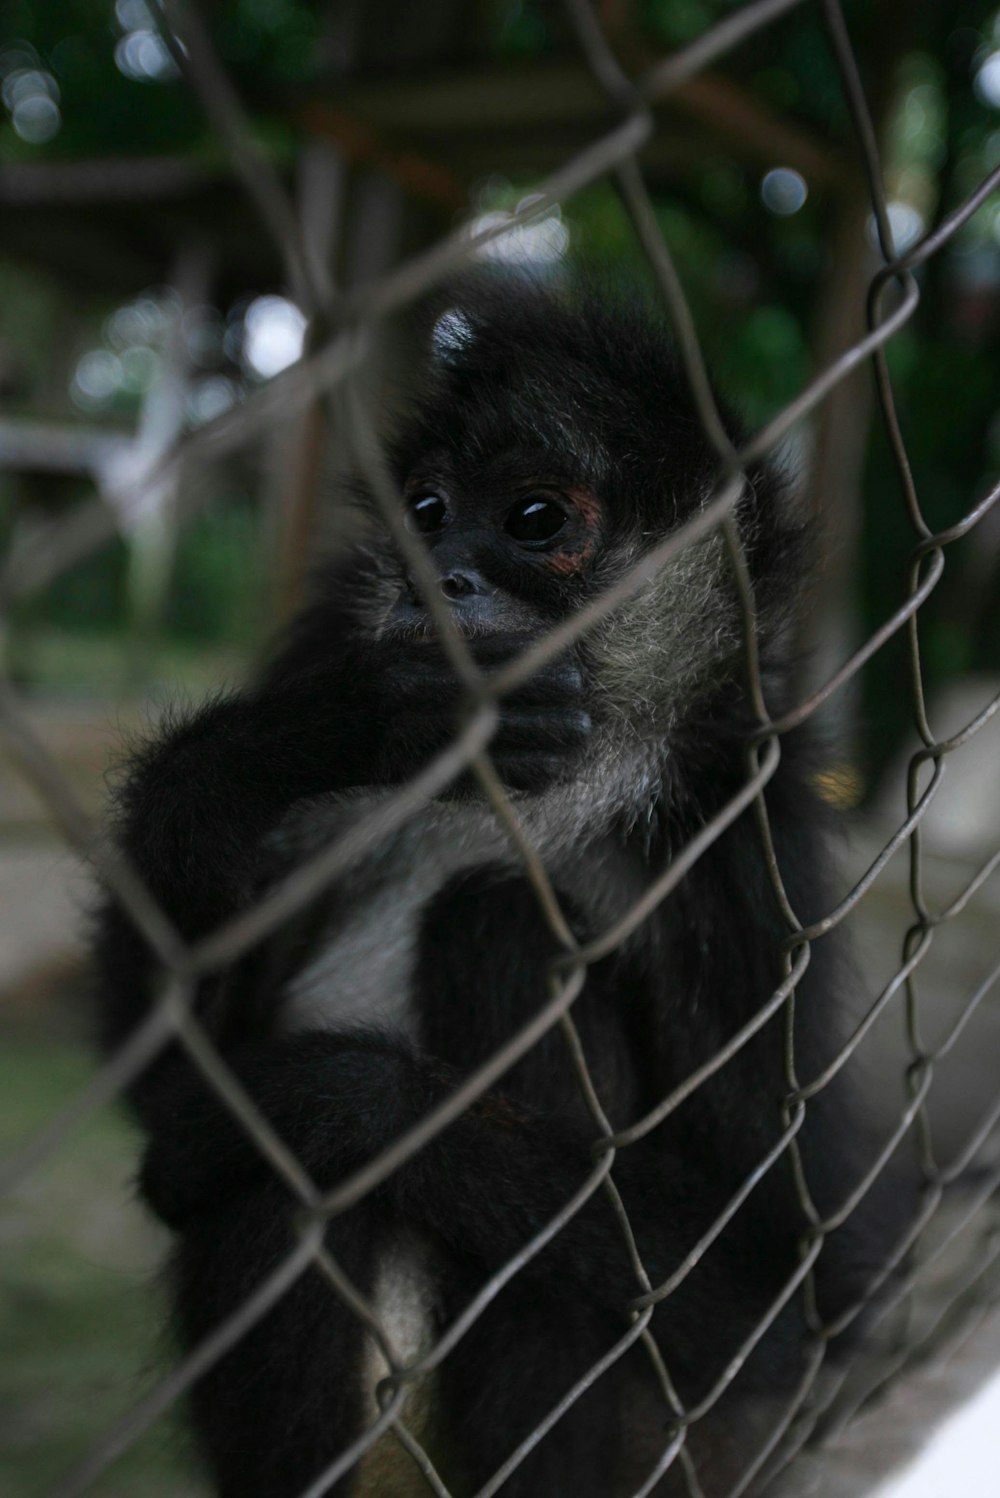 a black and white monkey behind a wire fence